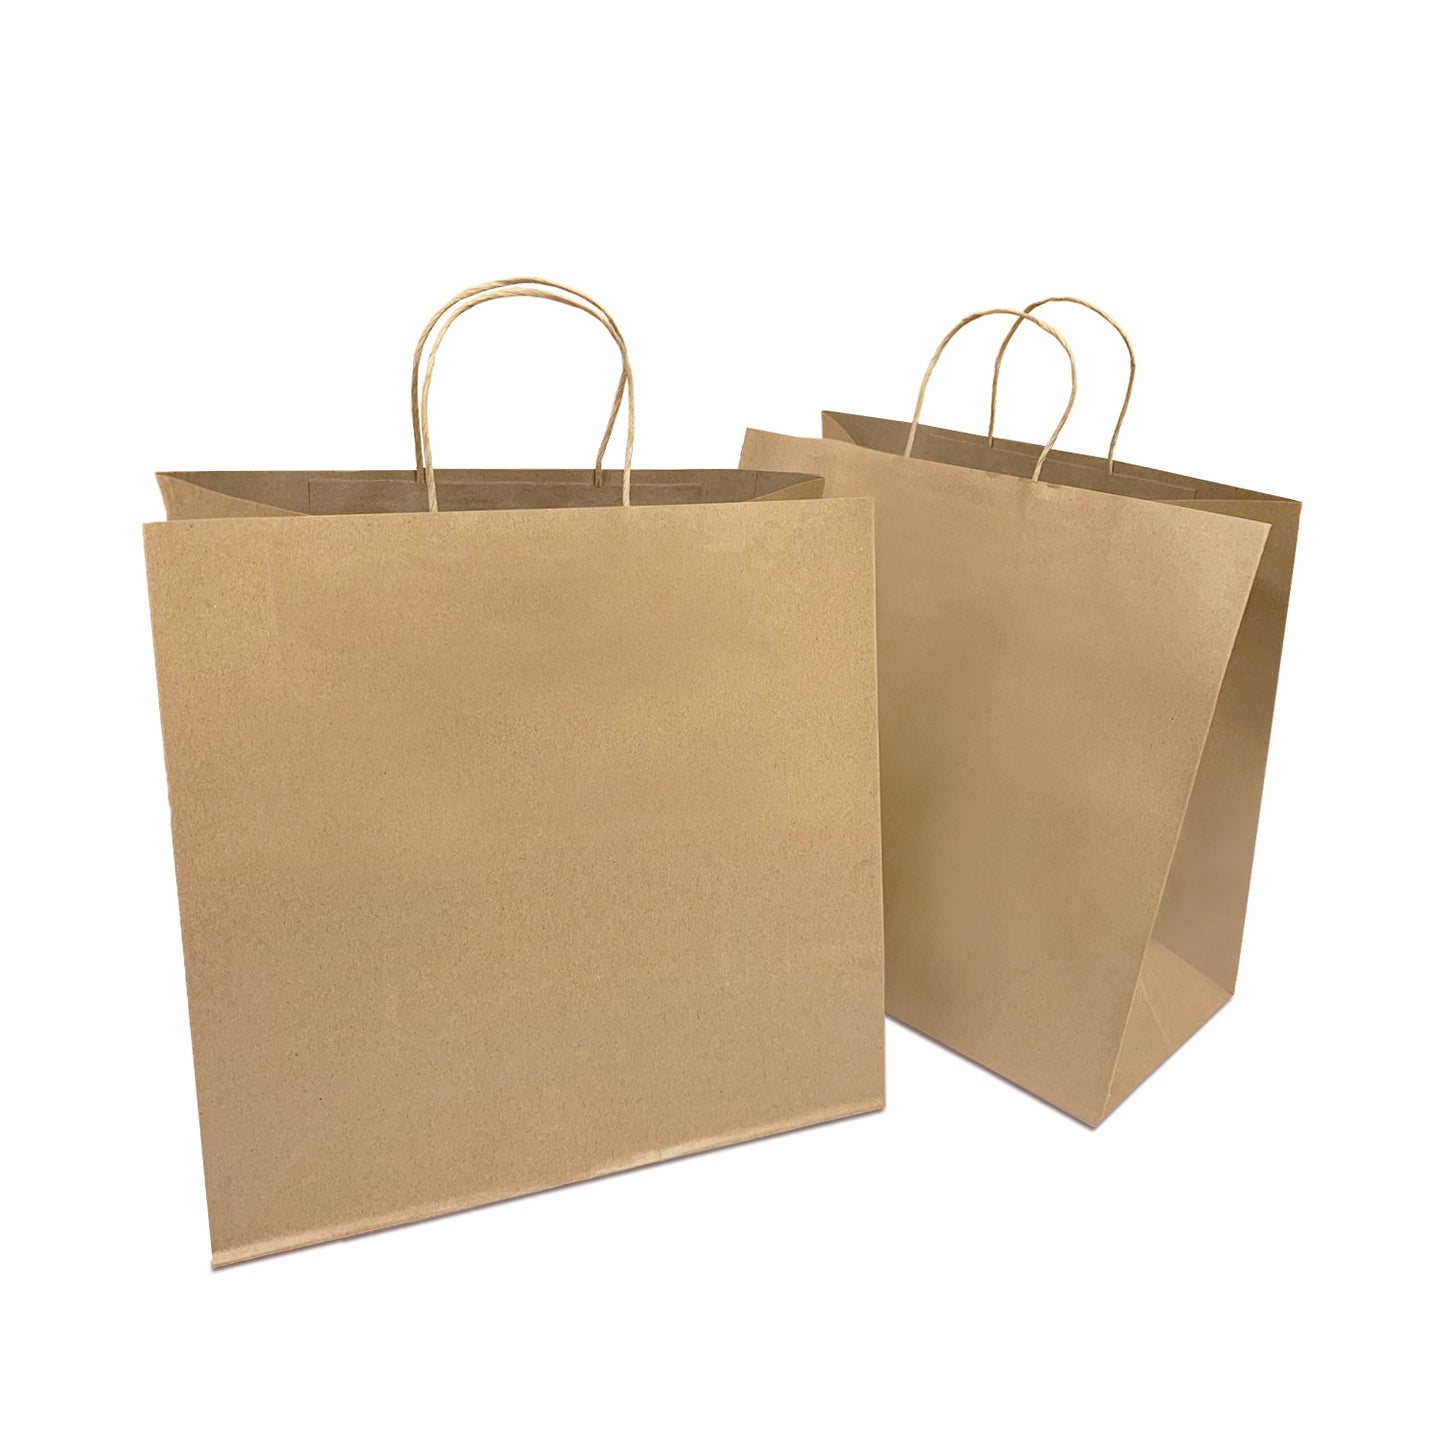 250 Pcs, Star, 13x7x13 inches, Kraft Paper Bags, with Twisted Handle